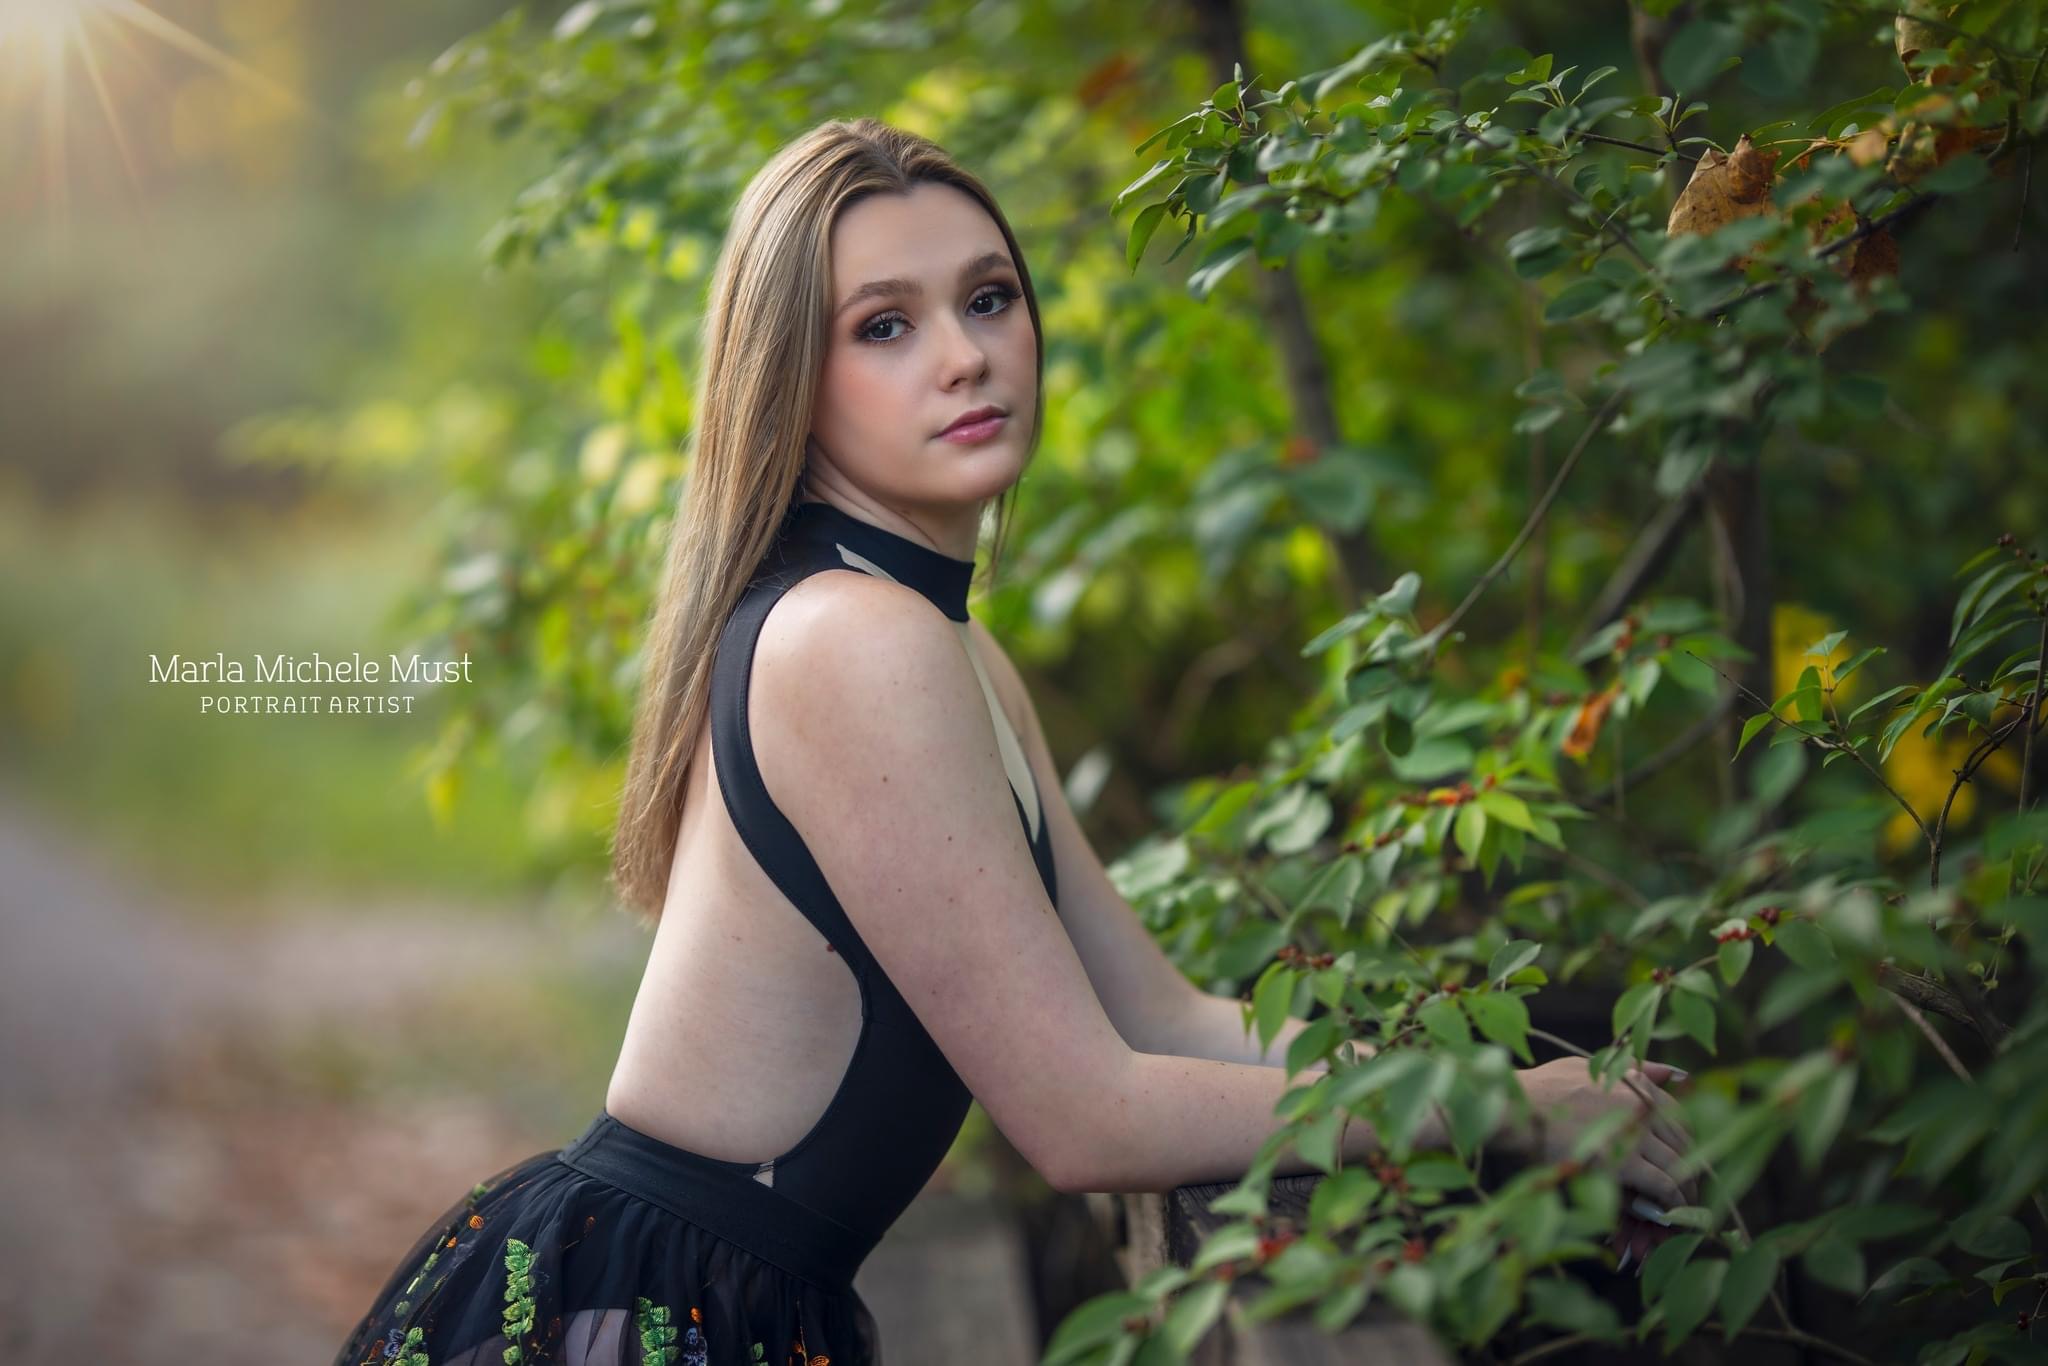 A young woman poses for her senior portrait in a classy black dress as she leans against a Detroit garden hedge